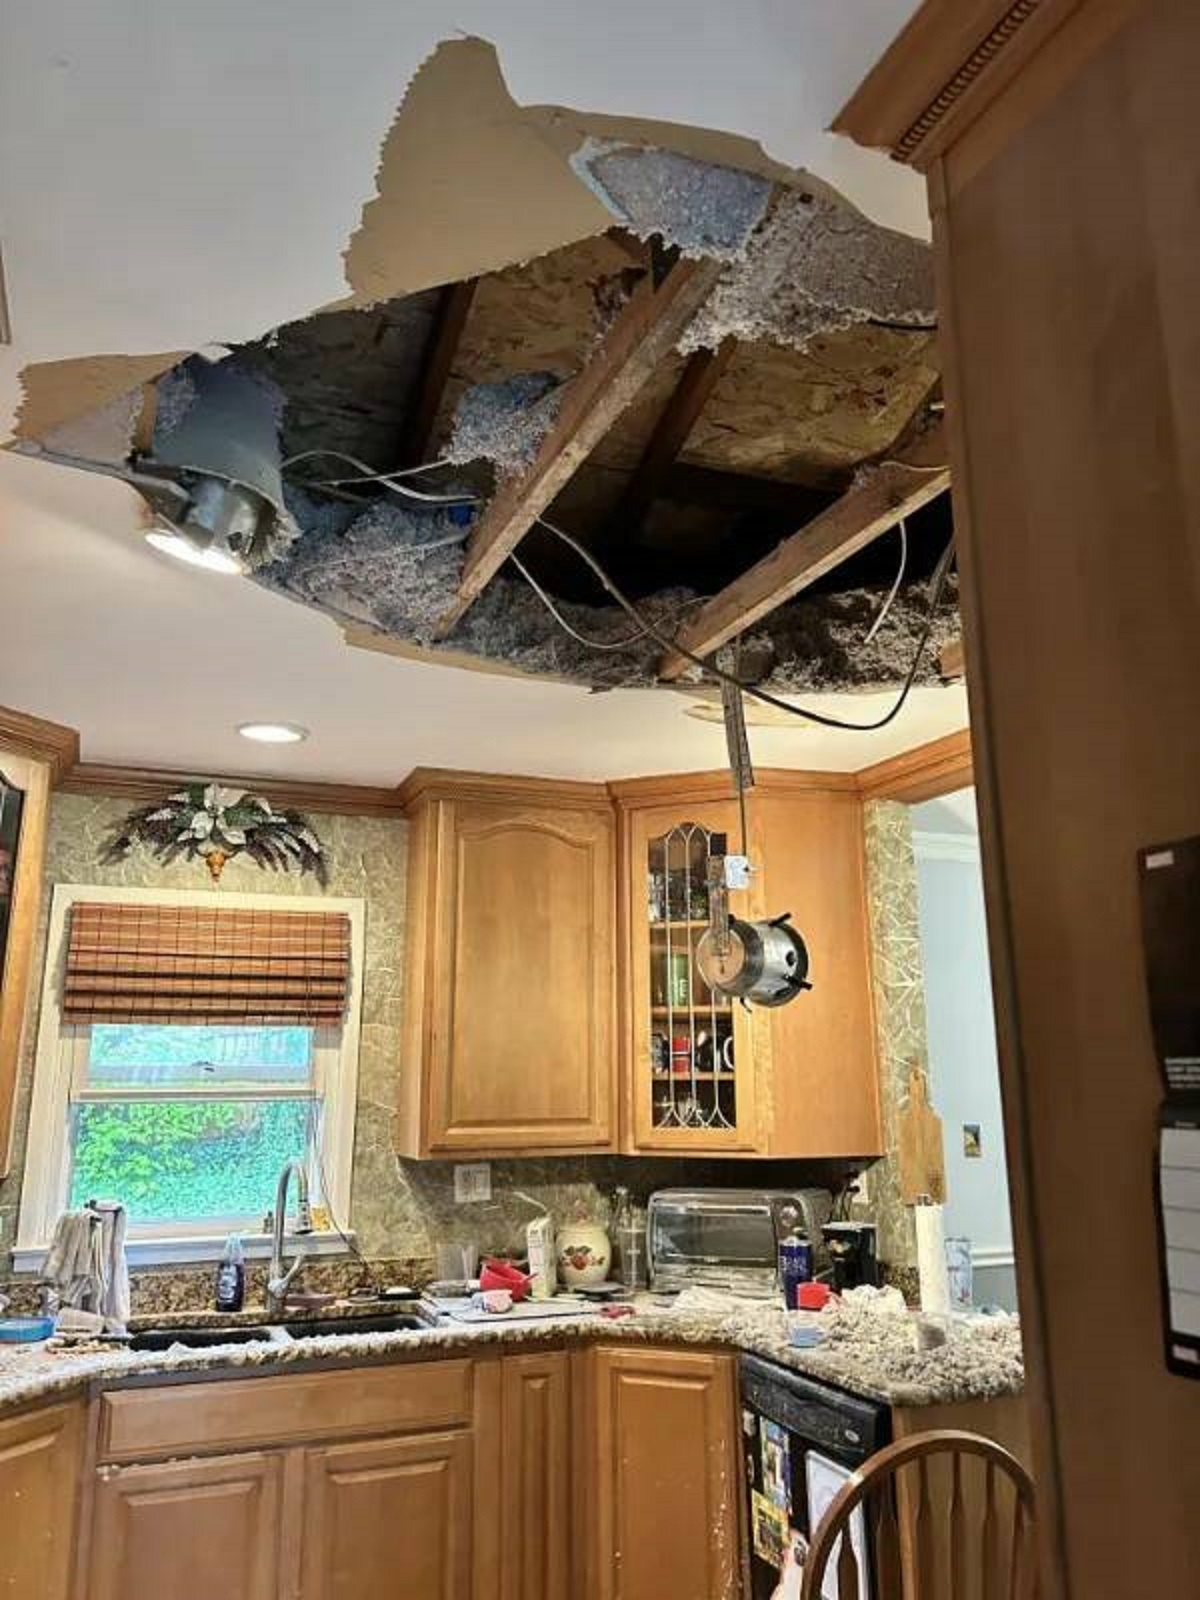 “Husband went into the attic to fix a leak. Lost his footing and fell through. He’s ok. The whole floor level of our home is not.”